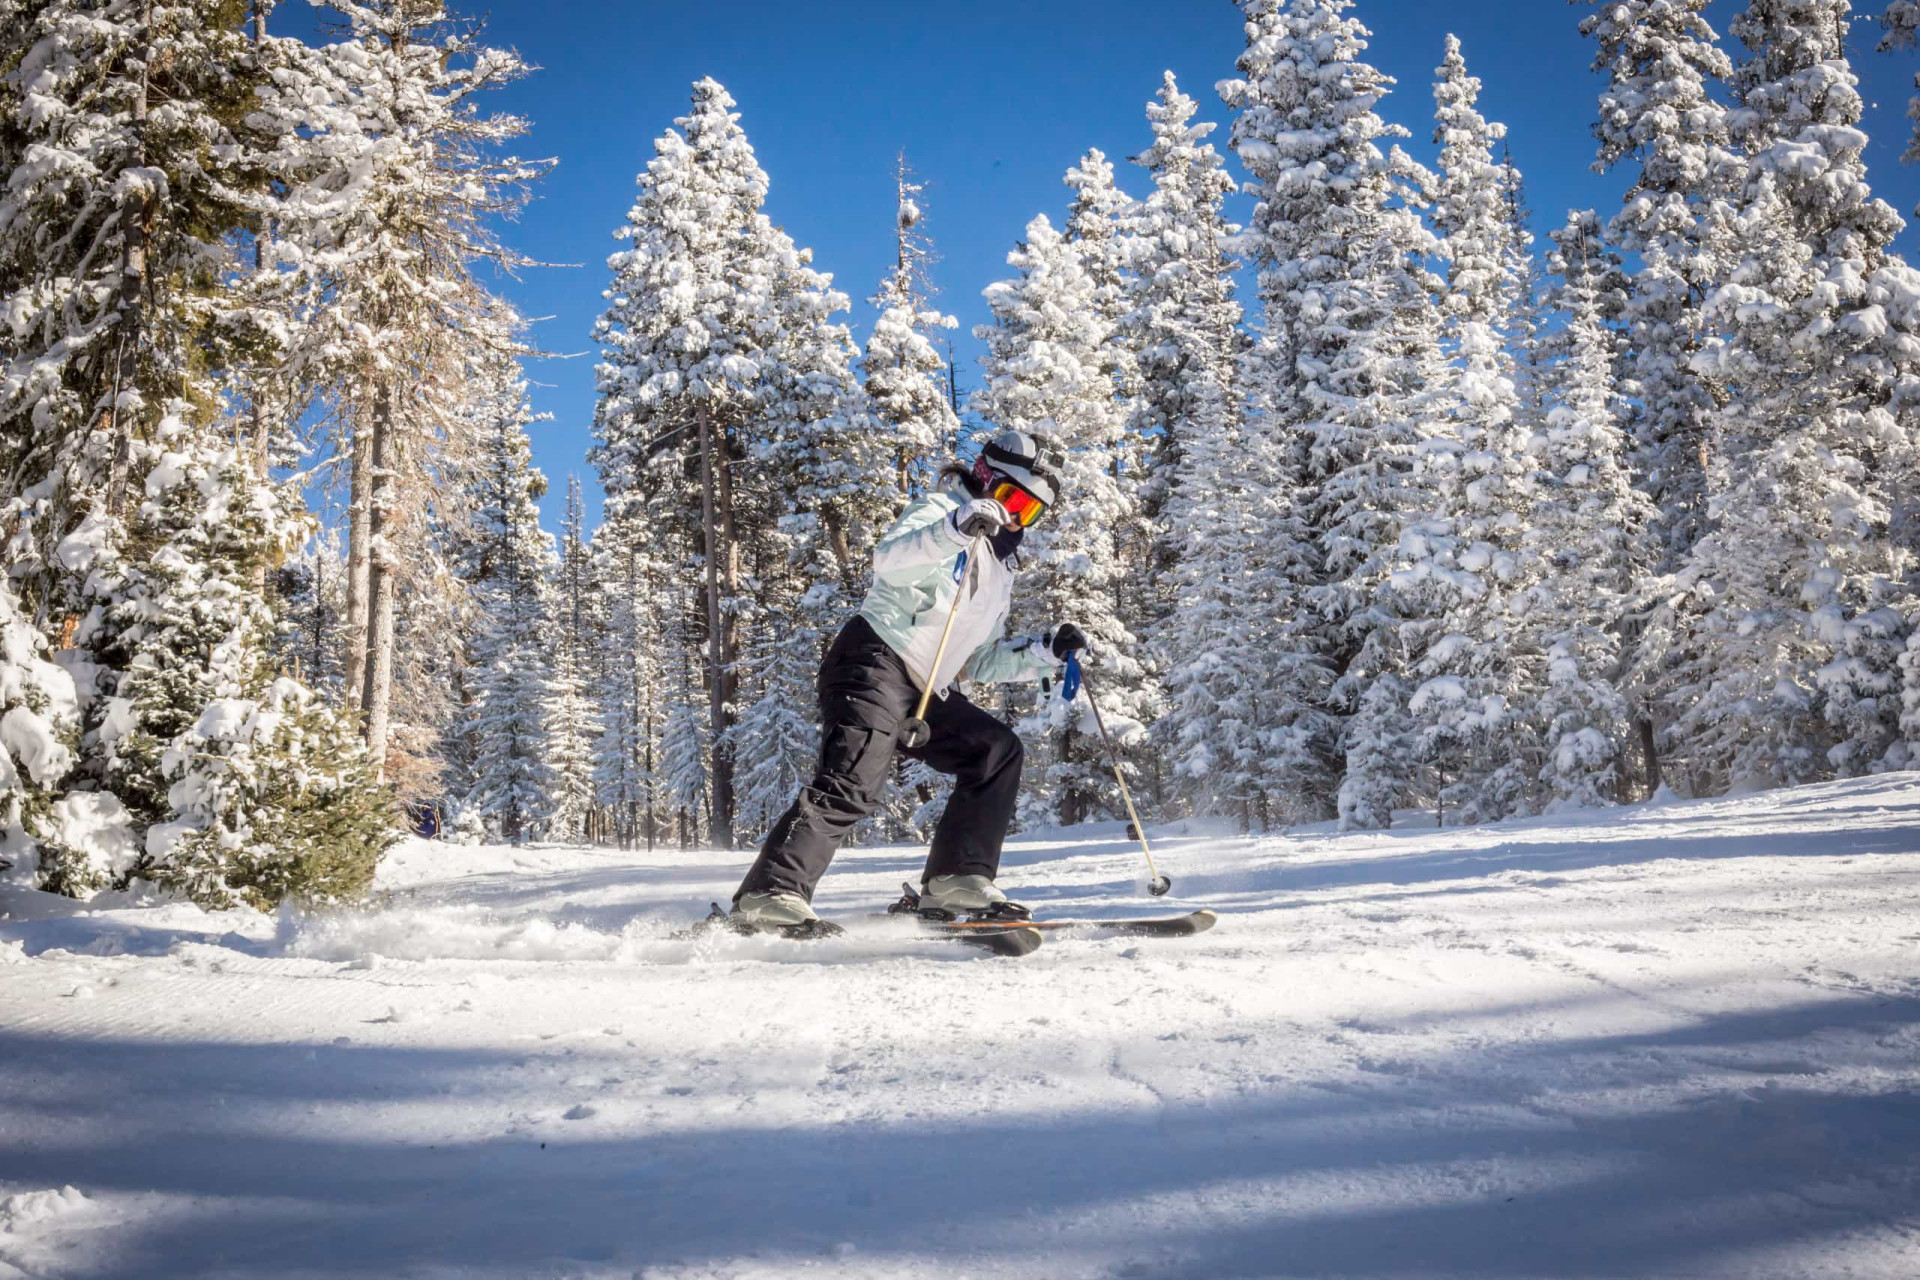 <p>Winter sports enthusiasts are rewarded with excellent skiing conditions in the Taos Ski Valley, a resort set high in the Sangre de Cristo Mountains. Suitable for intermediate and advanced skiers, the valley area is considered one of New Mexico's premier resorts.</p> <p>Sources: (History) (Biography)</p> <p>See also: <a href="https://www.starsinsider.com/celebrity/453398/celebrities-hitting-the-slopes">Celebrities hitting the slopes</a></p>